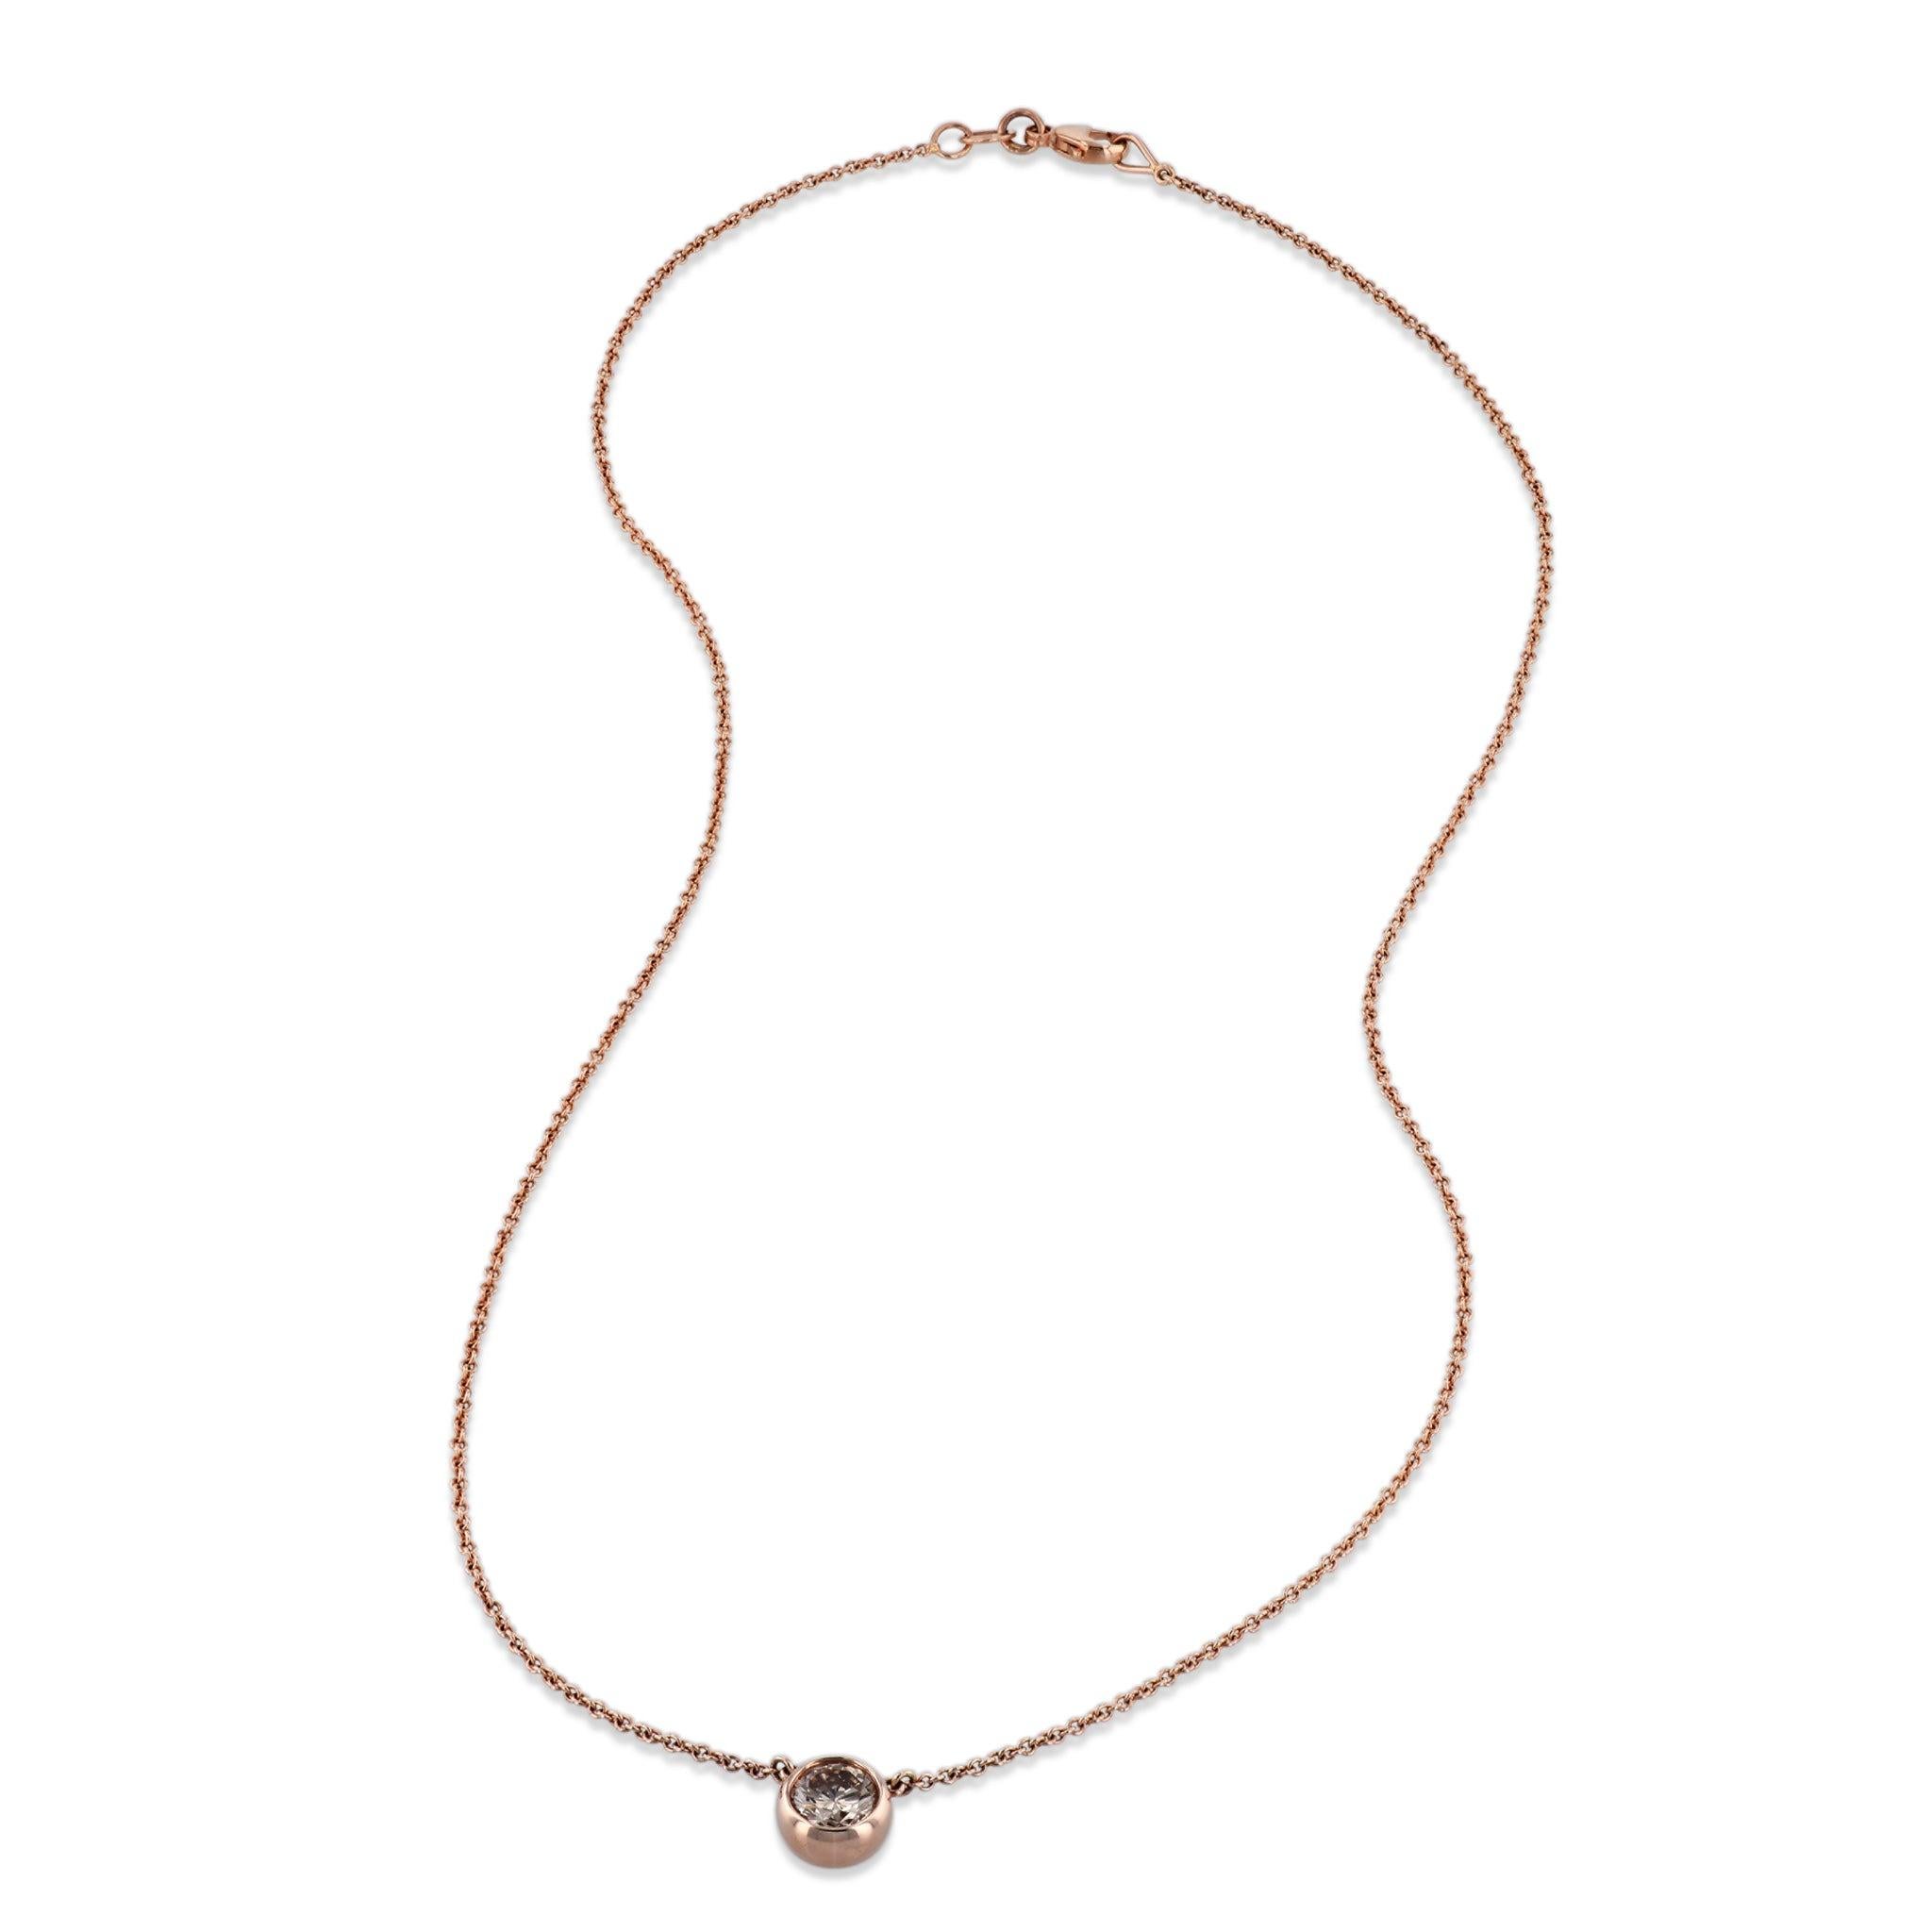 Show your timeless love with this glowing Cinnamon Diamond Rose Gold Pendant Necklace! Crafted with light brown bezel-set diamond, this necklace is absolutely stunning. The 14kt. rose gold chain is 18'' and handmade by H&H Jewels. Perfect for